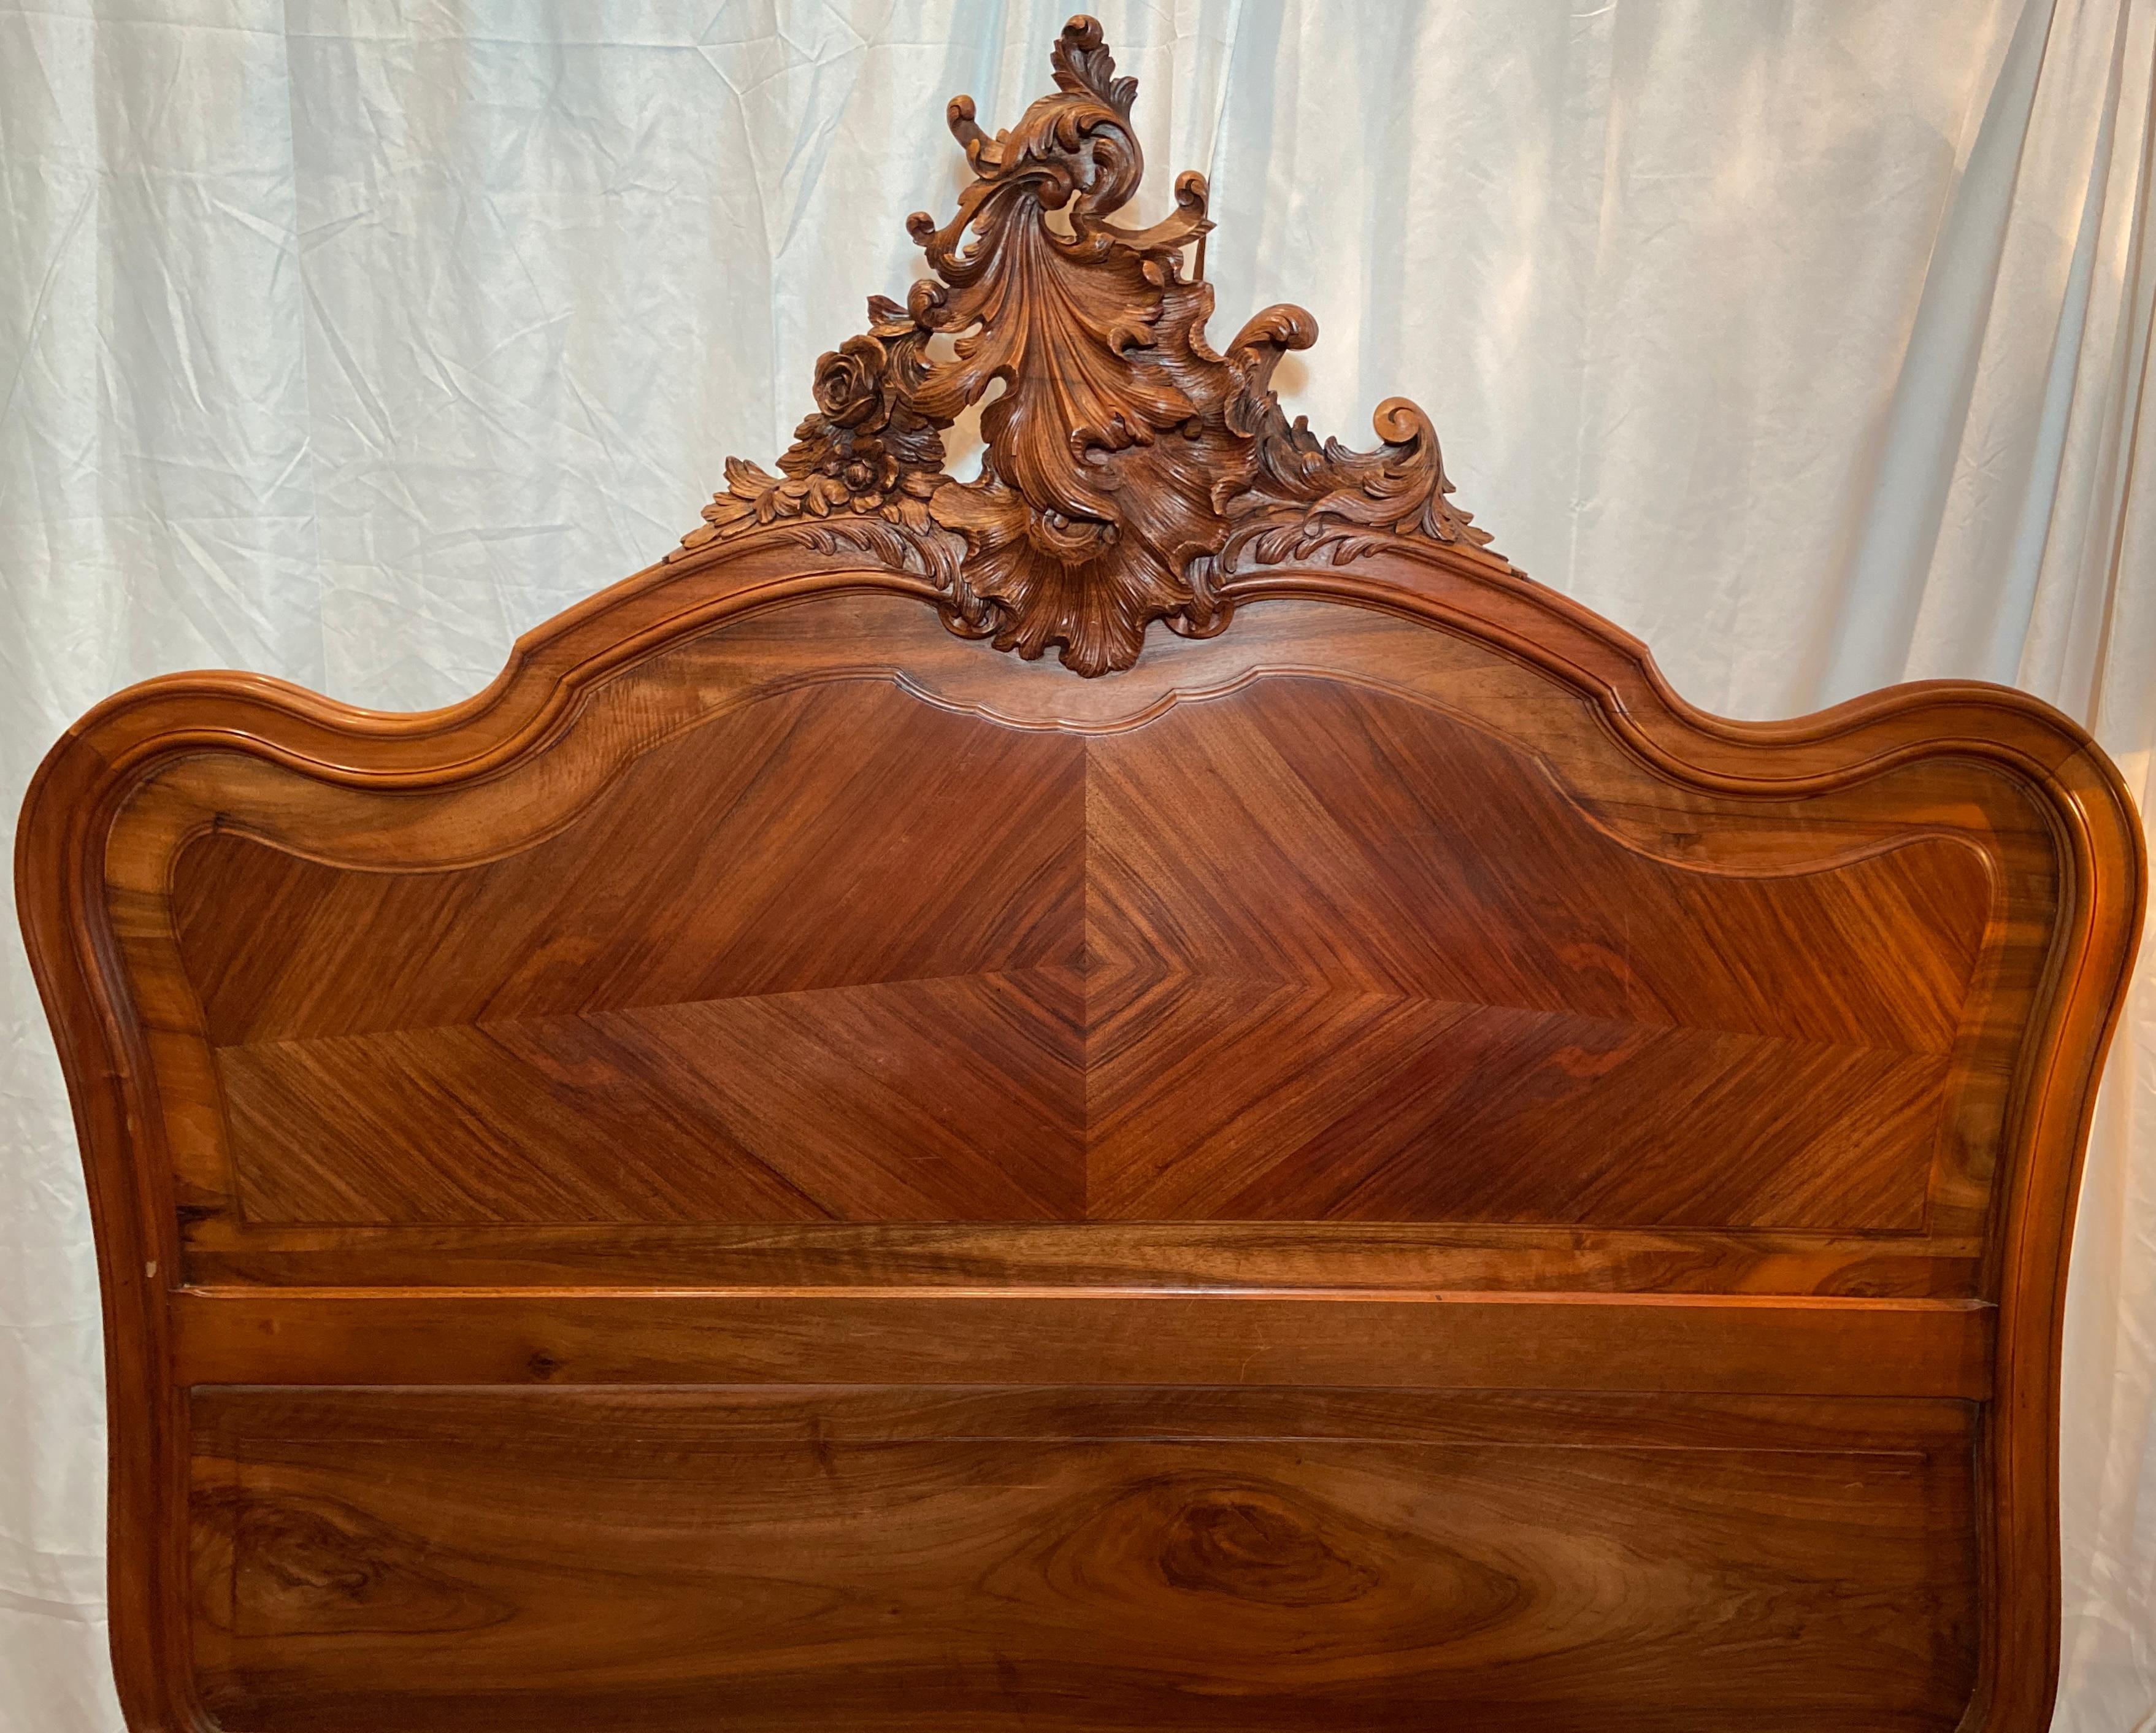 Antique French Louis XV finely carved walnut bed, circa 1880-1890.
Measurements: 
Headboard: 64 inches high x 57 inches wide 
Footboard: 39 inches high x 62 inches wide
Exterior Dimensions: 84 inches long x 60 inches wide 
Interior Dimensions: